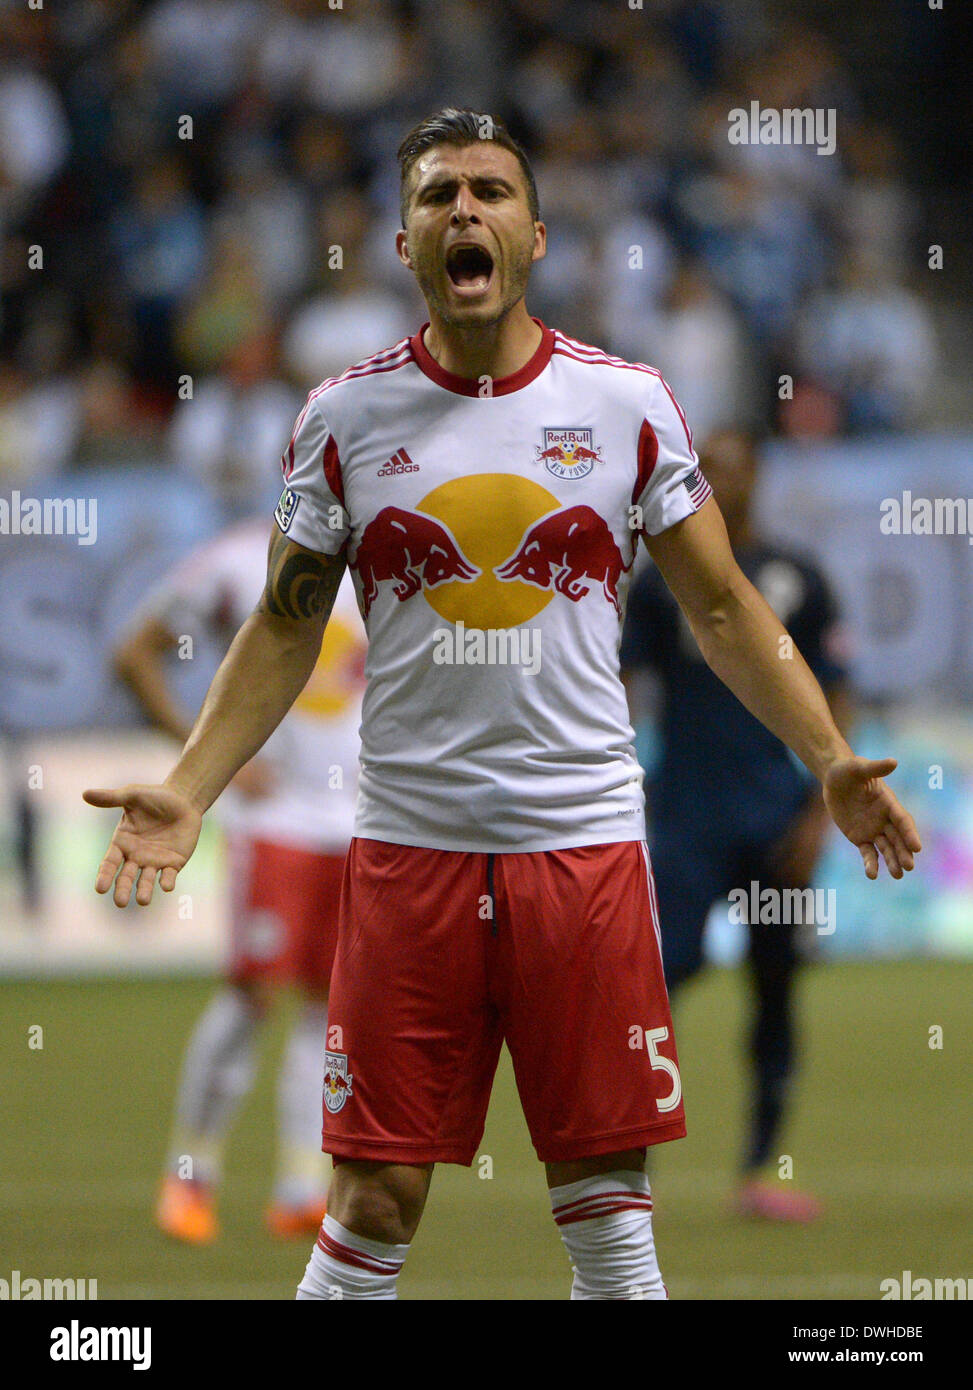 Vancouver, Canada. 8th Mar, 2014. New York Red Bulls' Armando reacts to loosing a MLS soccer season opener to Vancouver Whitecaps at BC Place in Vancouver, Canada, on March 8, 2014. Whitecaps defeated Red Bulls 4-1. Credit:  Sergei Bachlakov/Xinhua/Alamy Live News Stock Photo